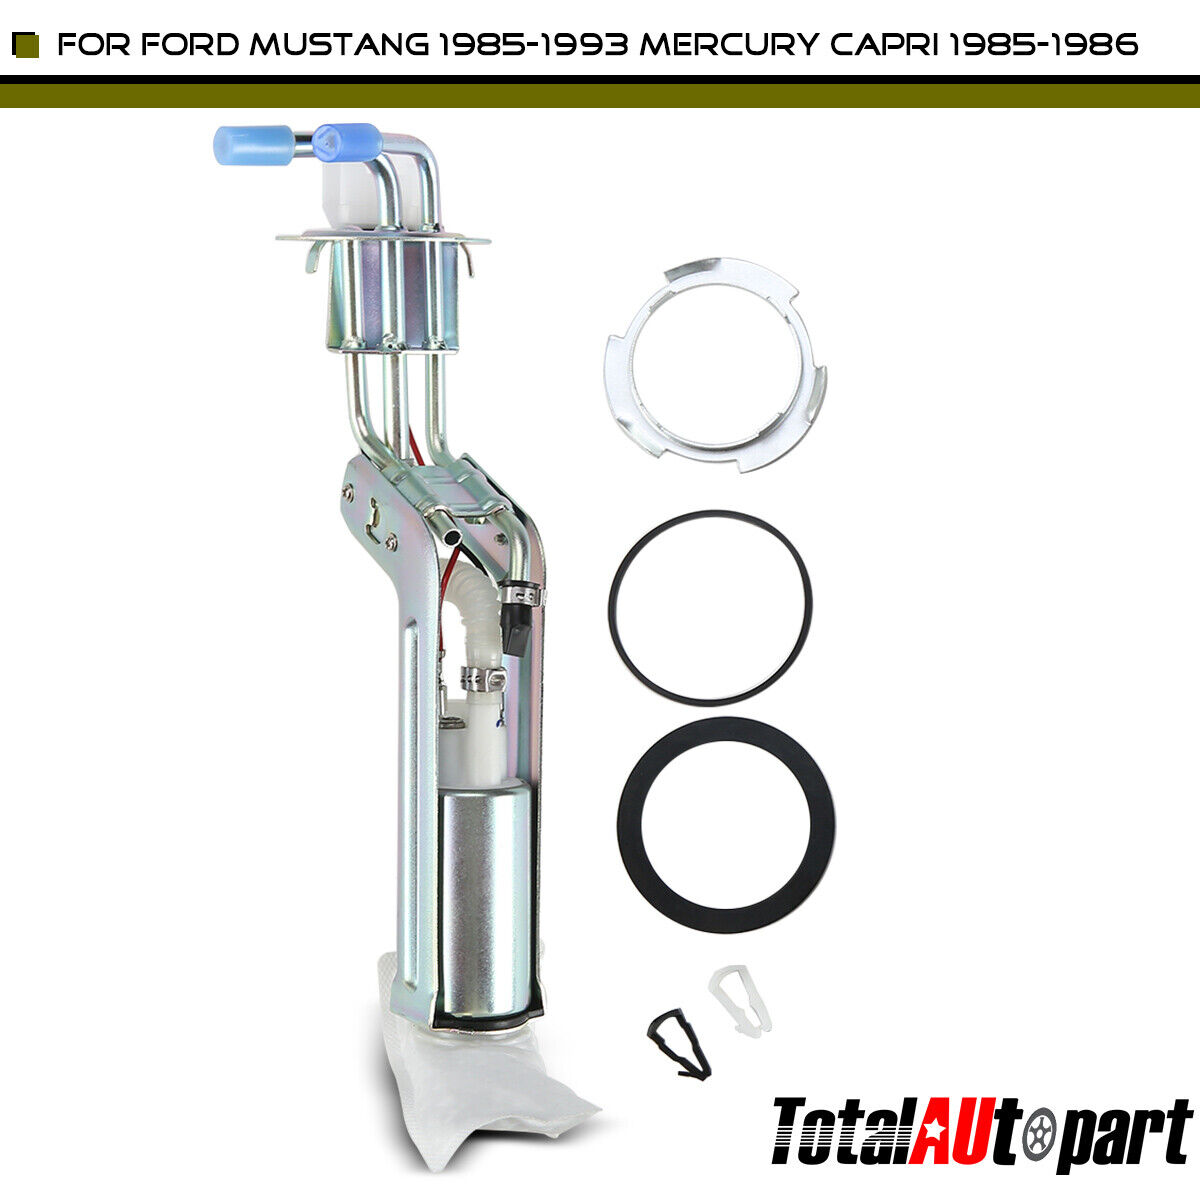 Fuel Pump Module Assembly for Ford Mustang Mercury Capri 1985-1996 E5ZZ9A407A